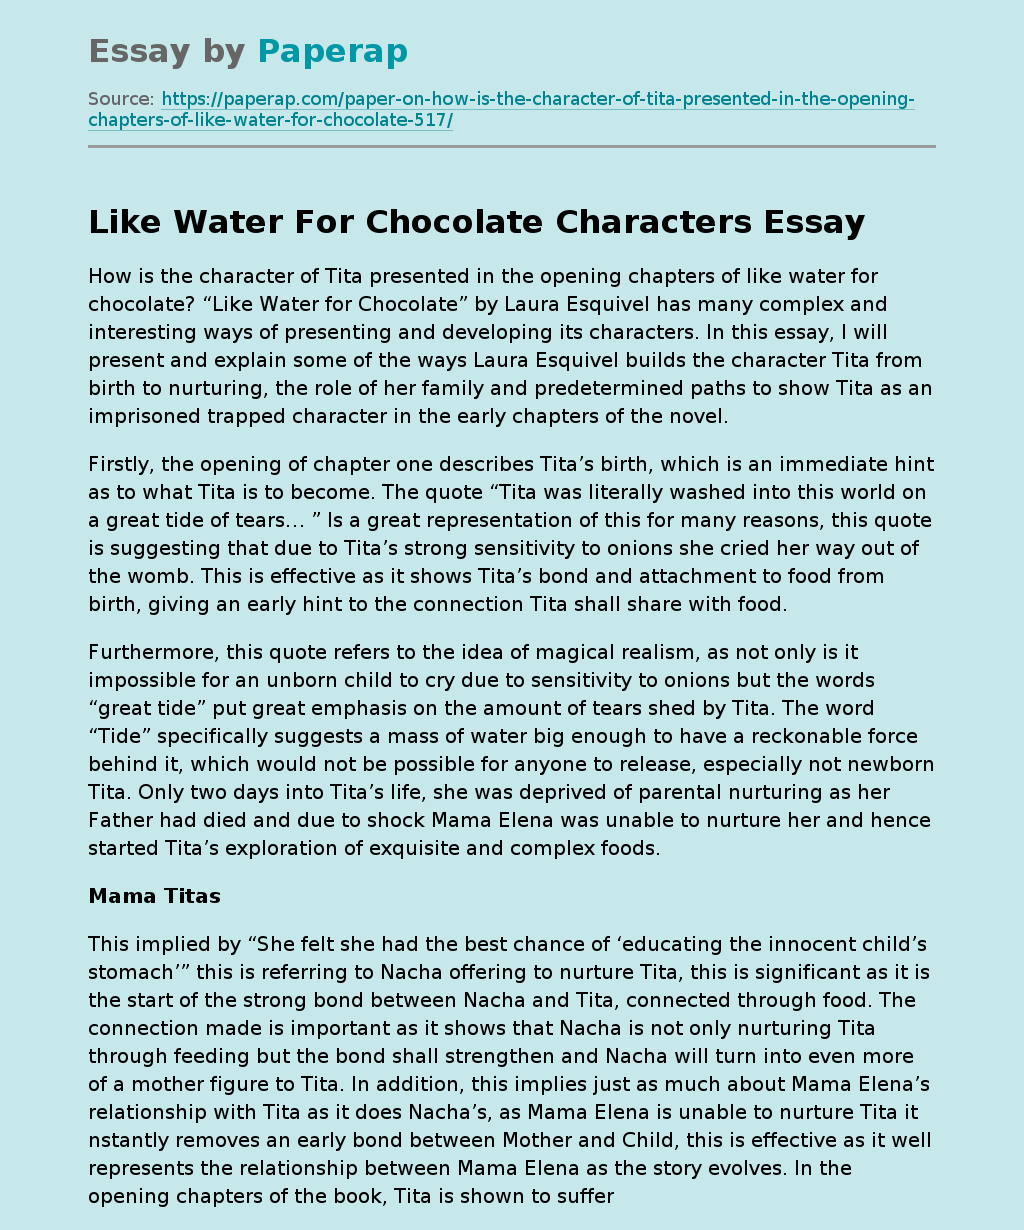 like water for chocolate symbolism essay